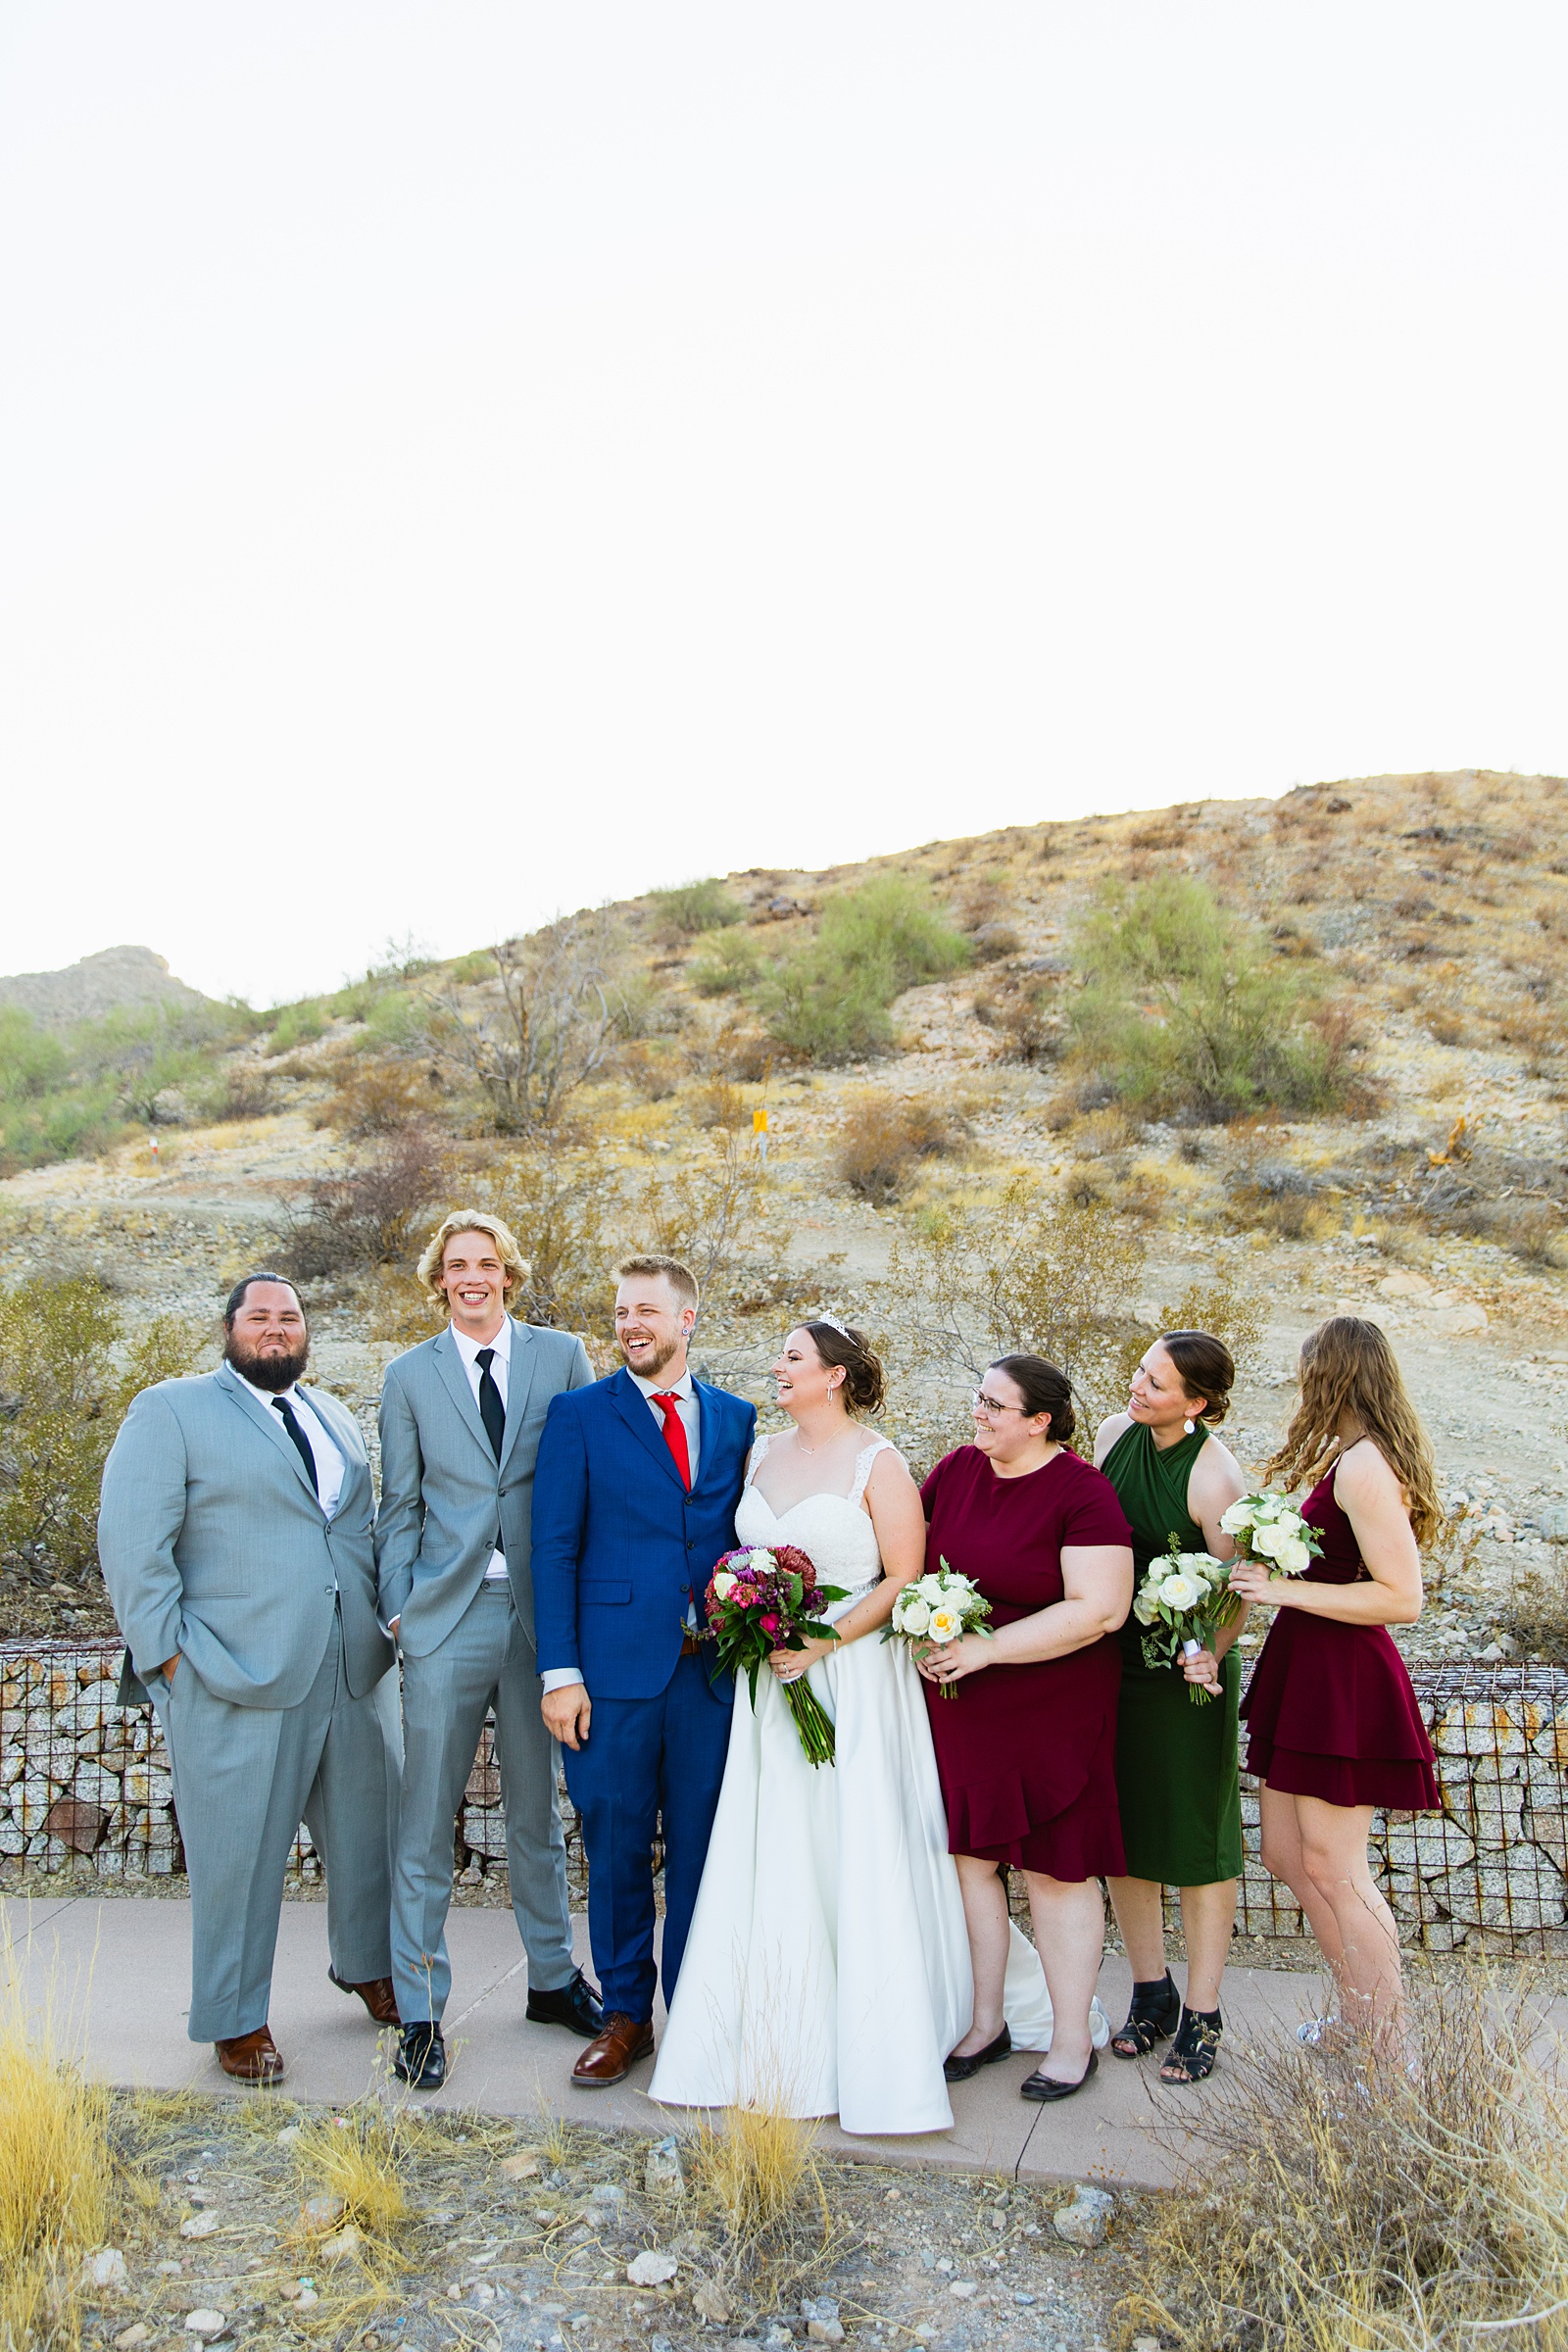 Bridal party laughing together at intimate desert wedding by Phoenix wedding photographer Juniper and Co Photography.